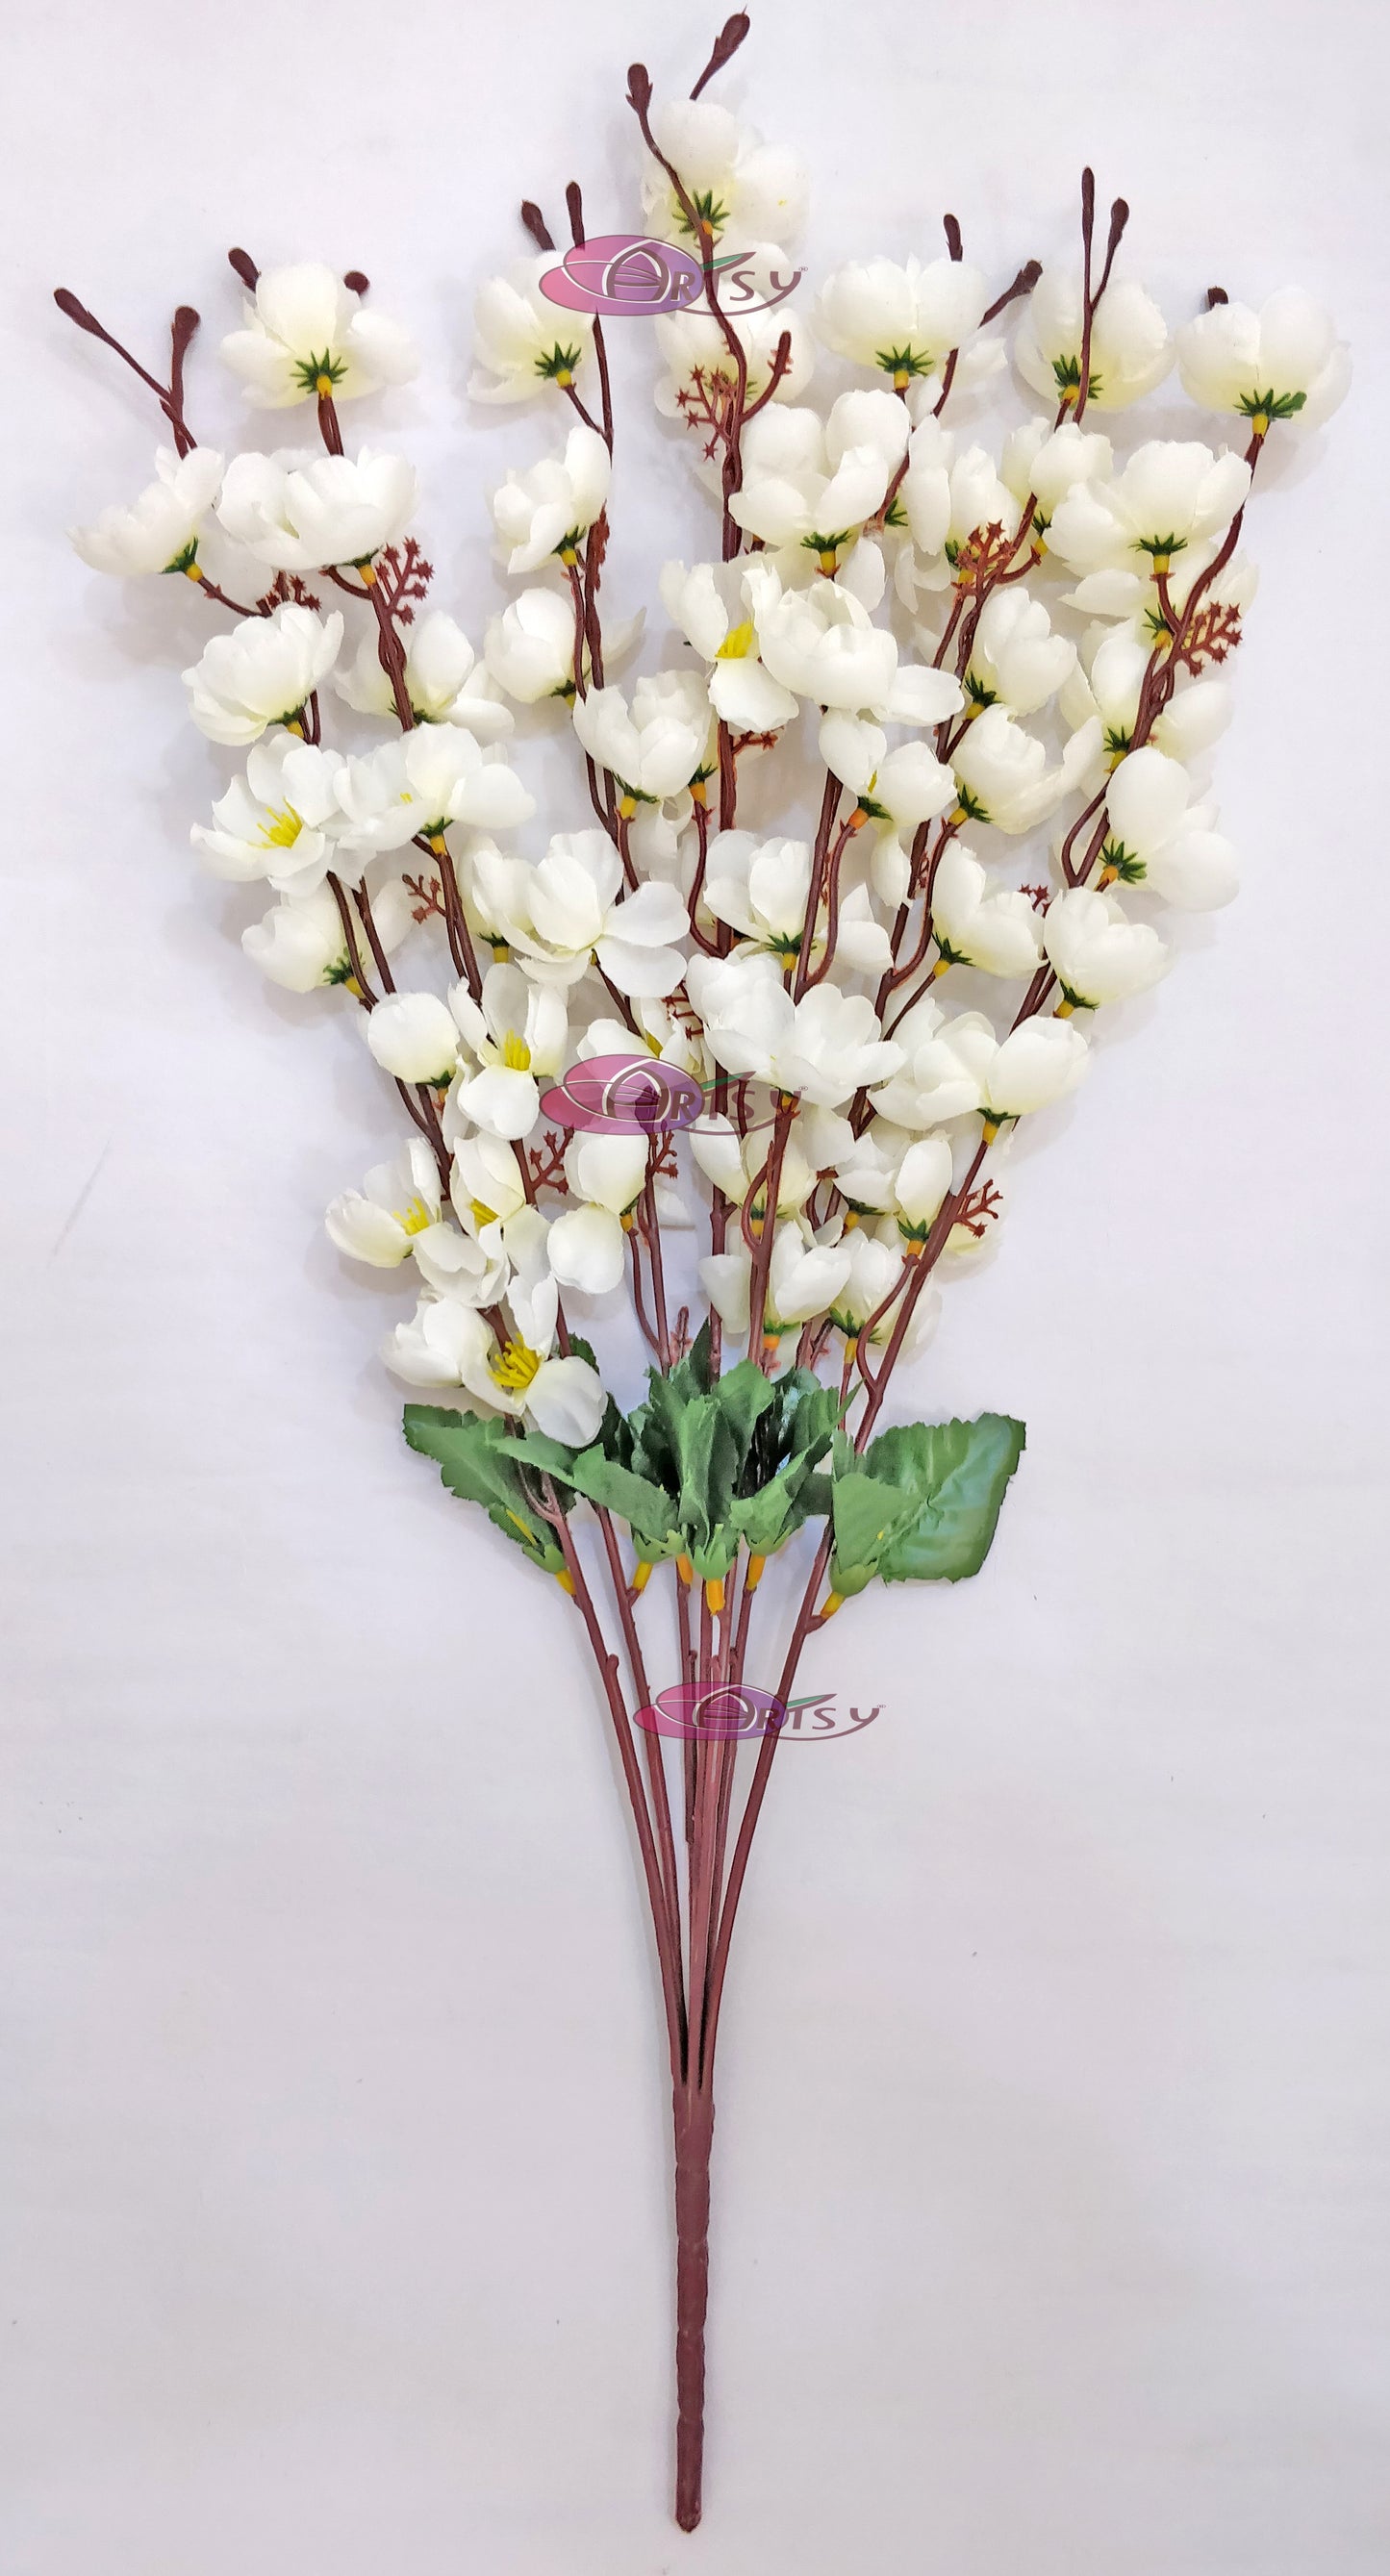 Elegant White Artificial Cherry Blossom Flower Bunch - Lifelike Pack of 1 Piece for Timeless Beauty, Without Vase, 55 Cm Long